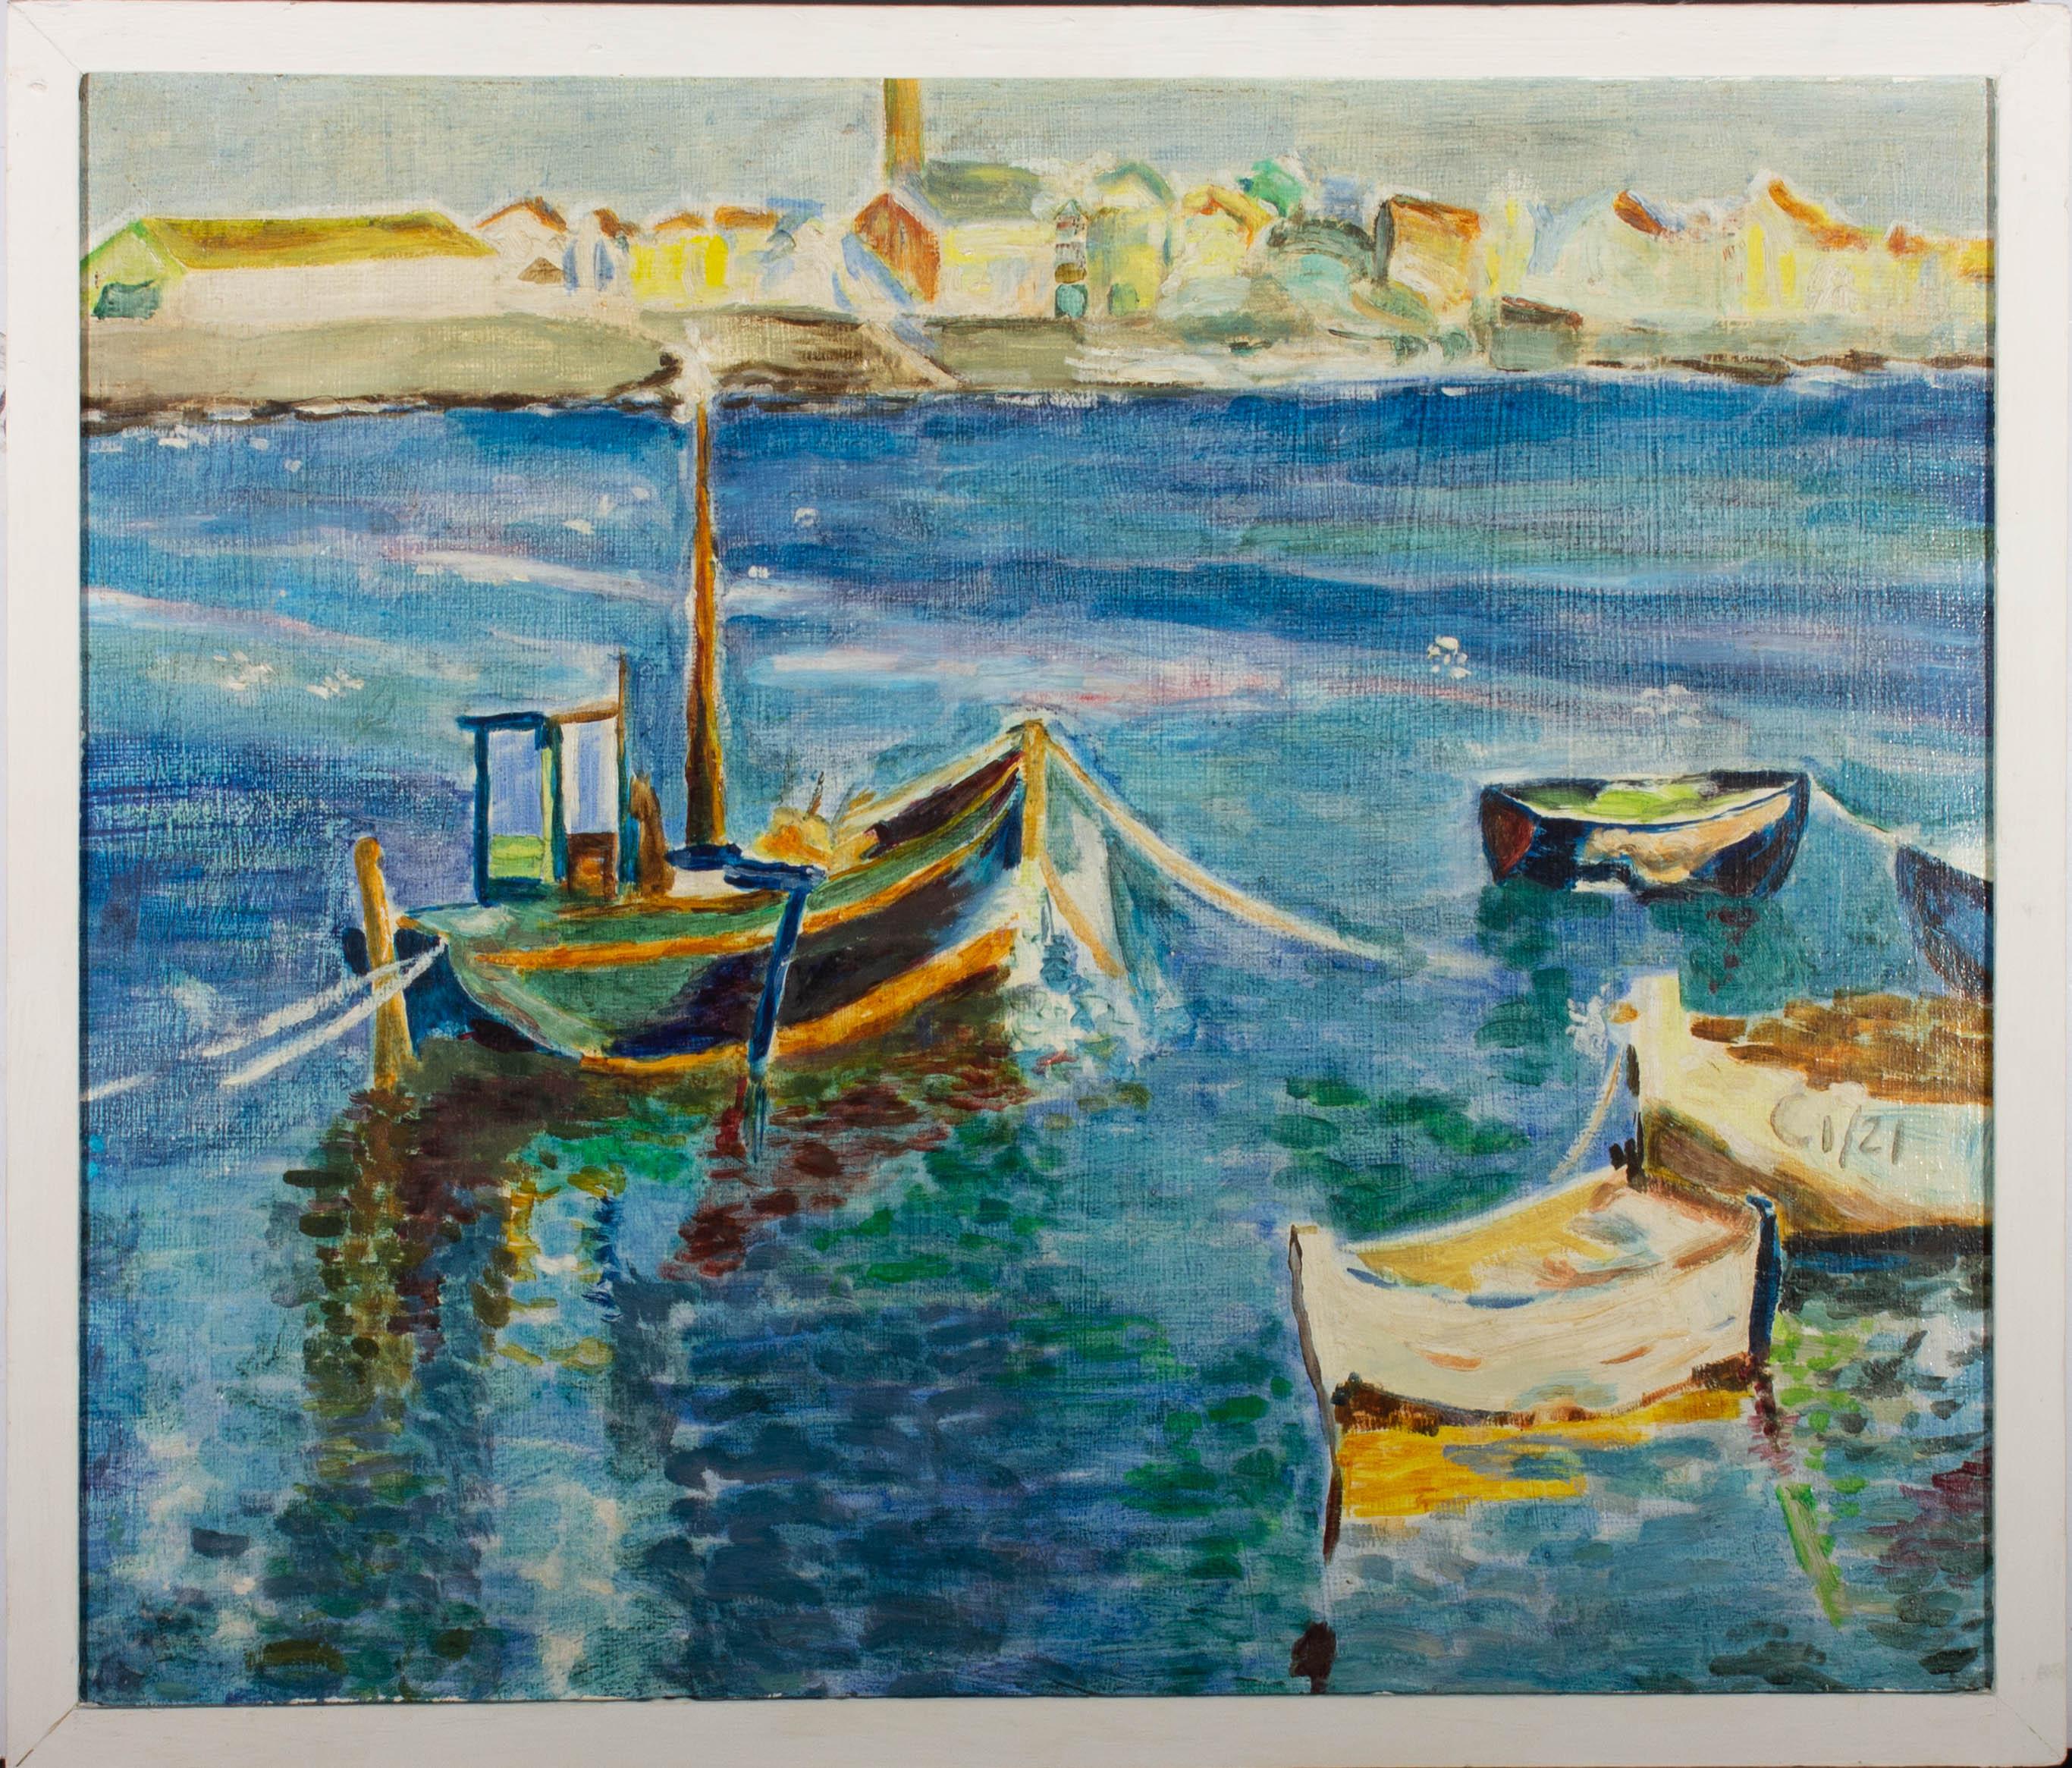 Contemporary Oil - Coastal Village Scene with Boats - Painting by Unknown